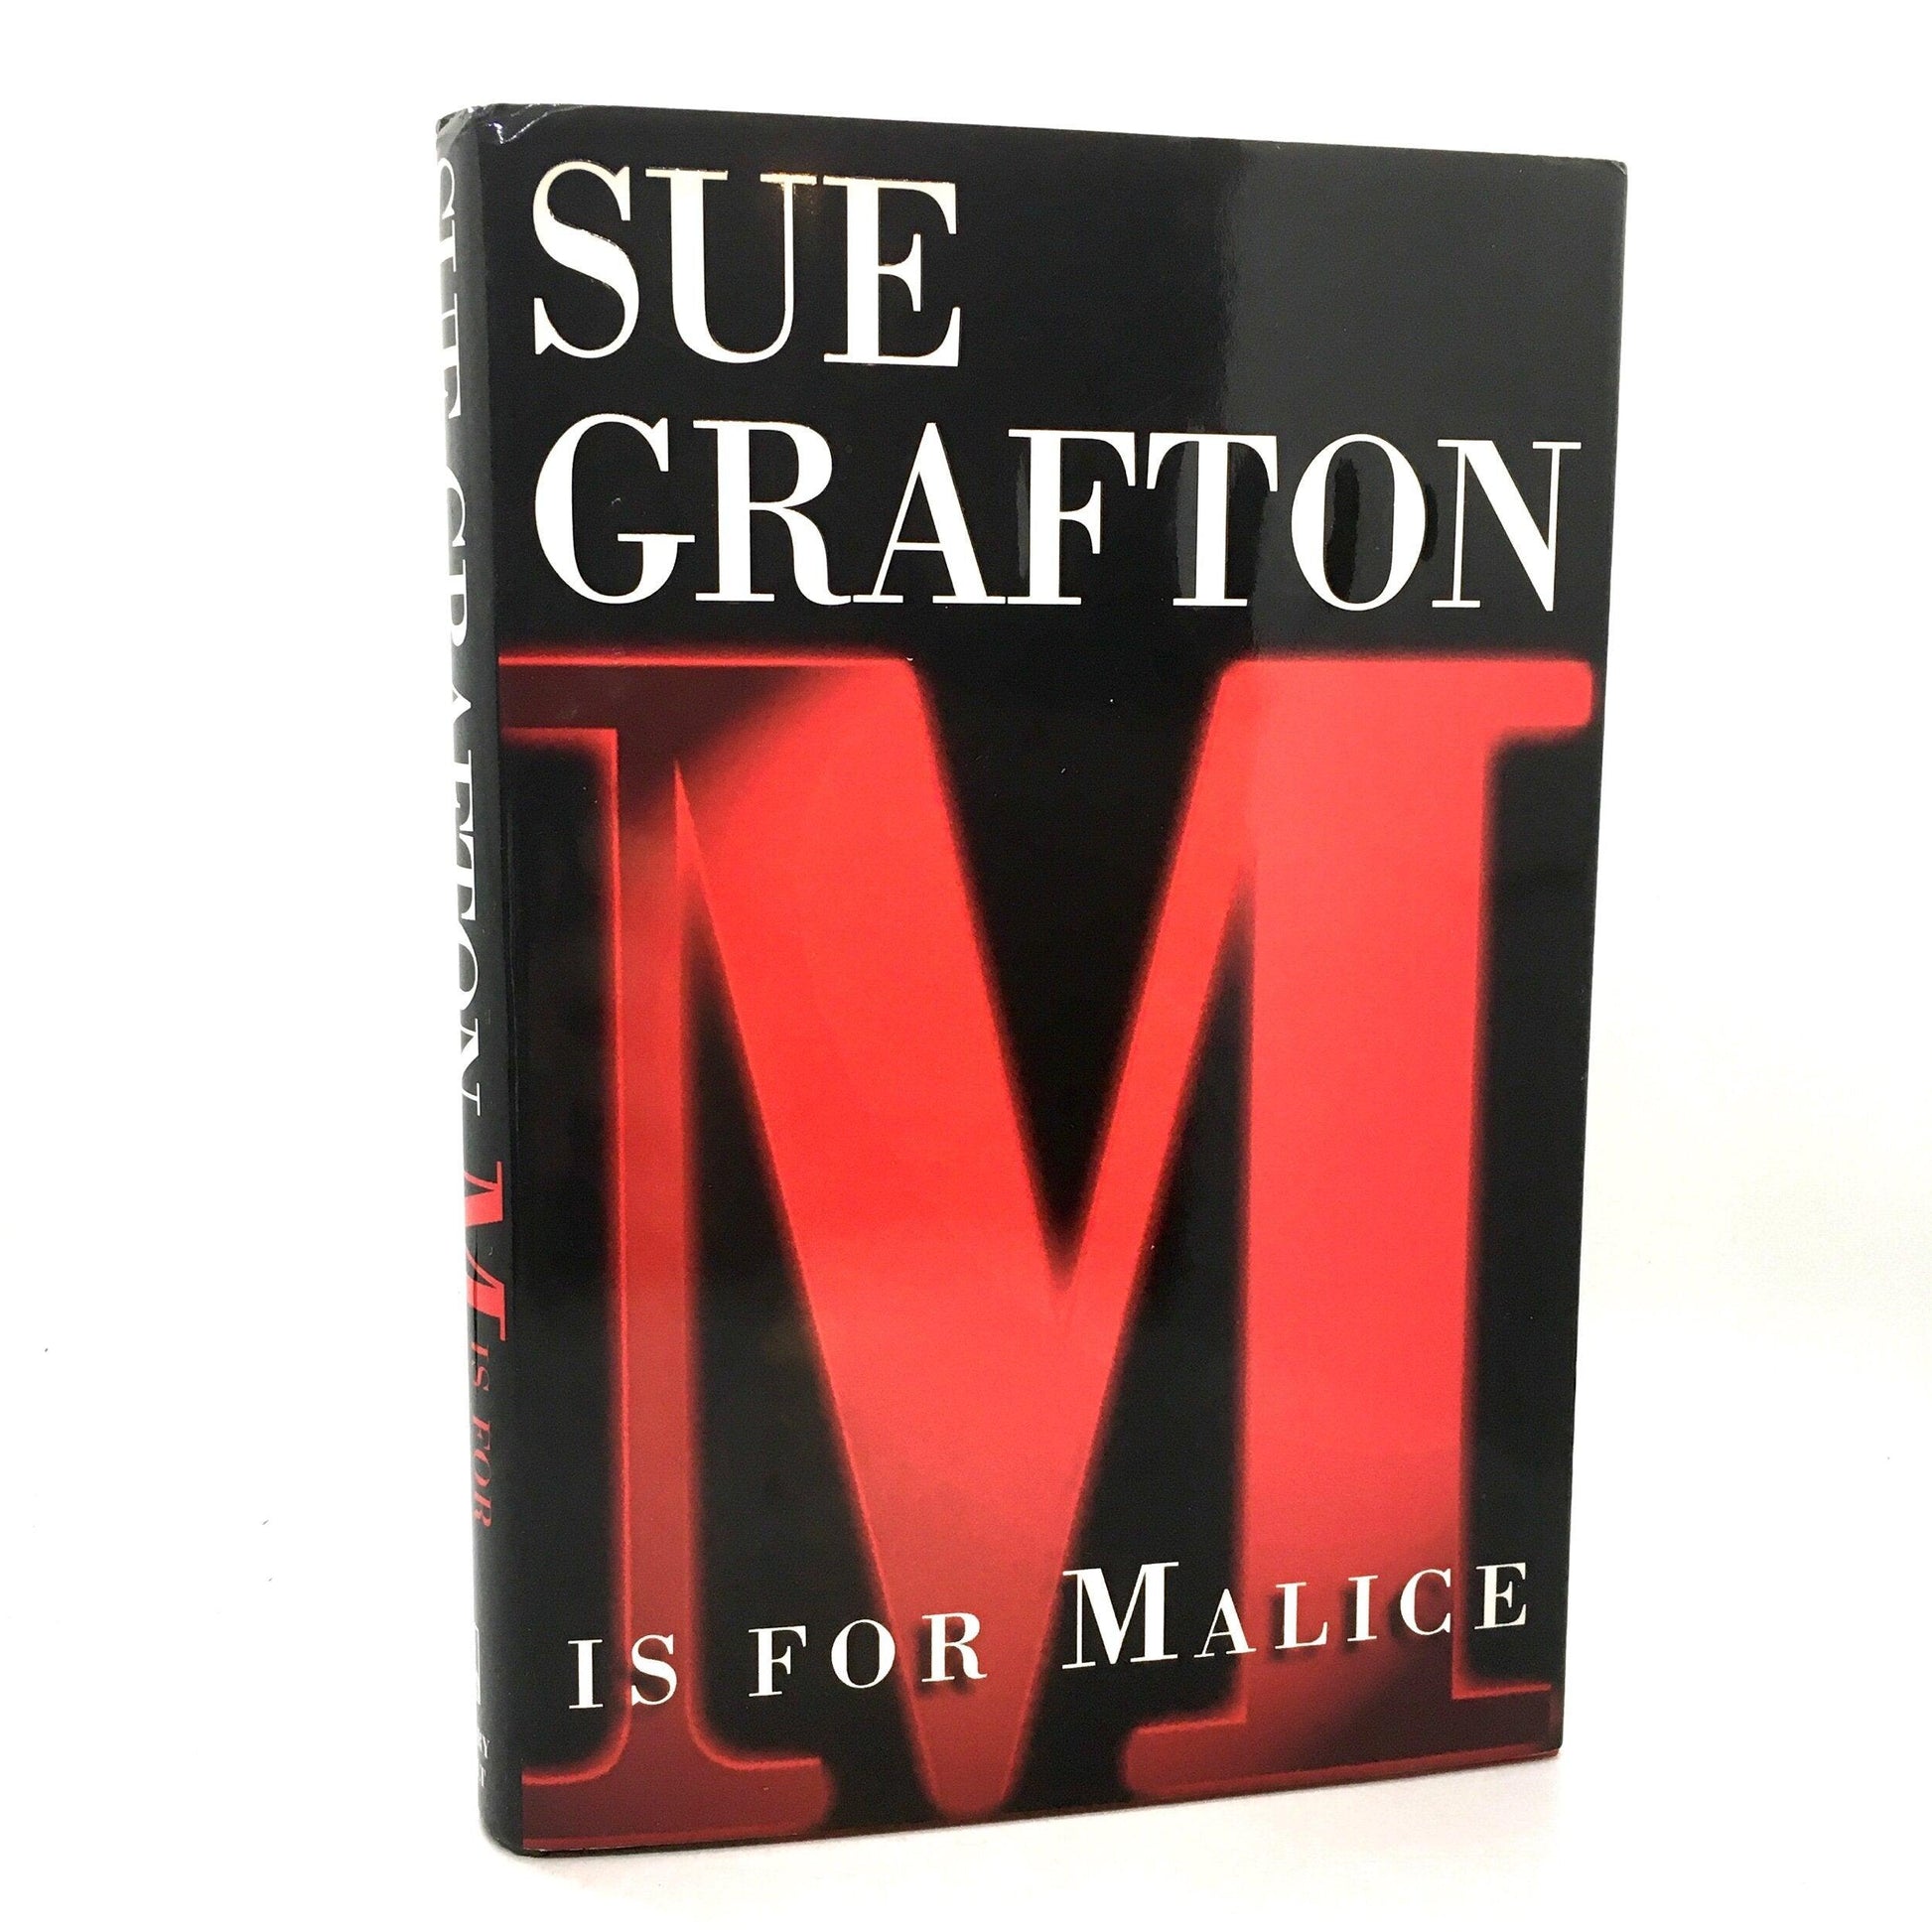 GRAFTON, Sue "M is For Malice" [Henry Holt, 1996] 1st Edition (Signed) - Buzz Bookstore